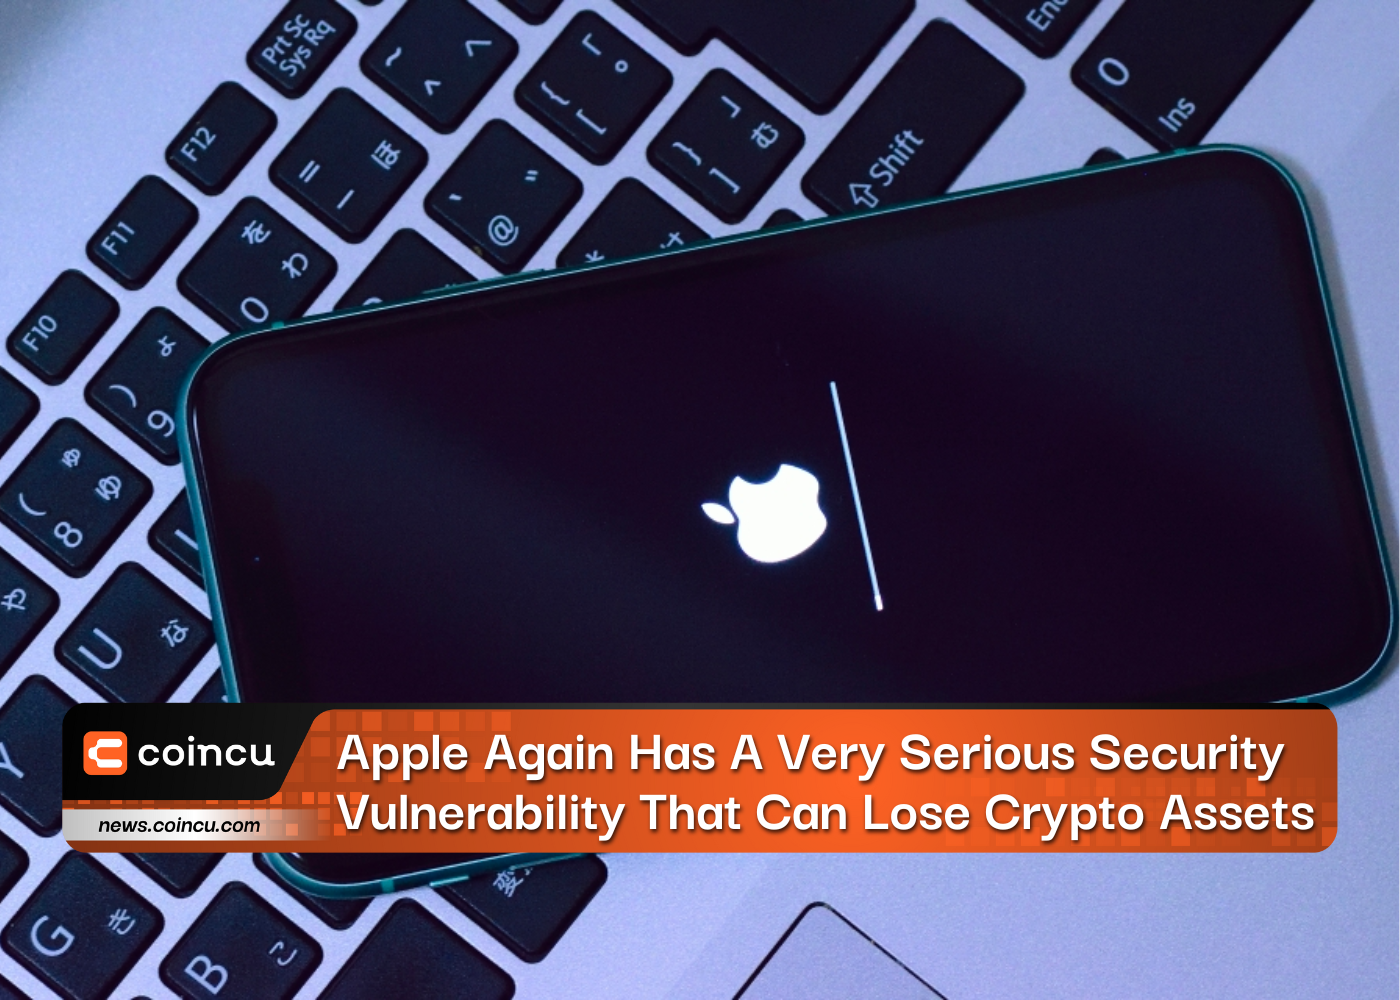 Apple Again Has A Serious Security Vulnerability That Can Lose Crypto Assets